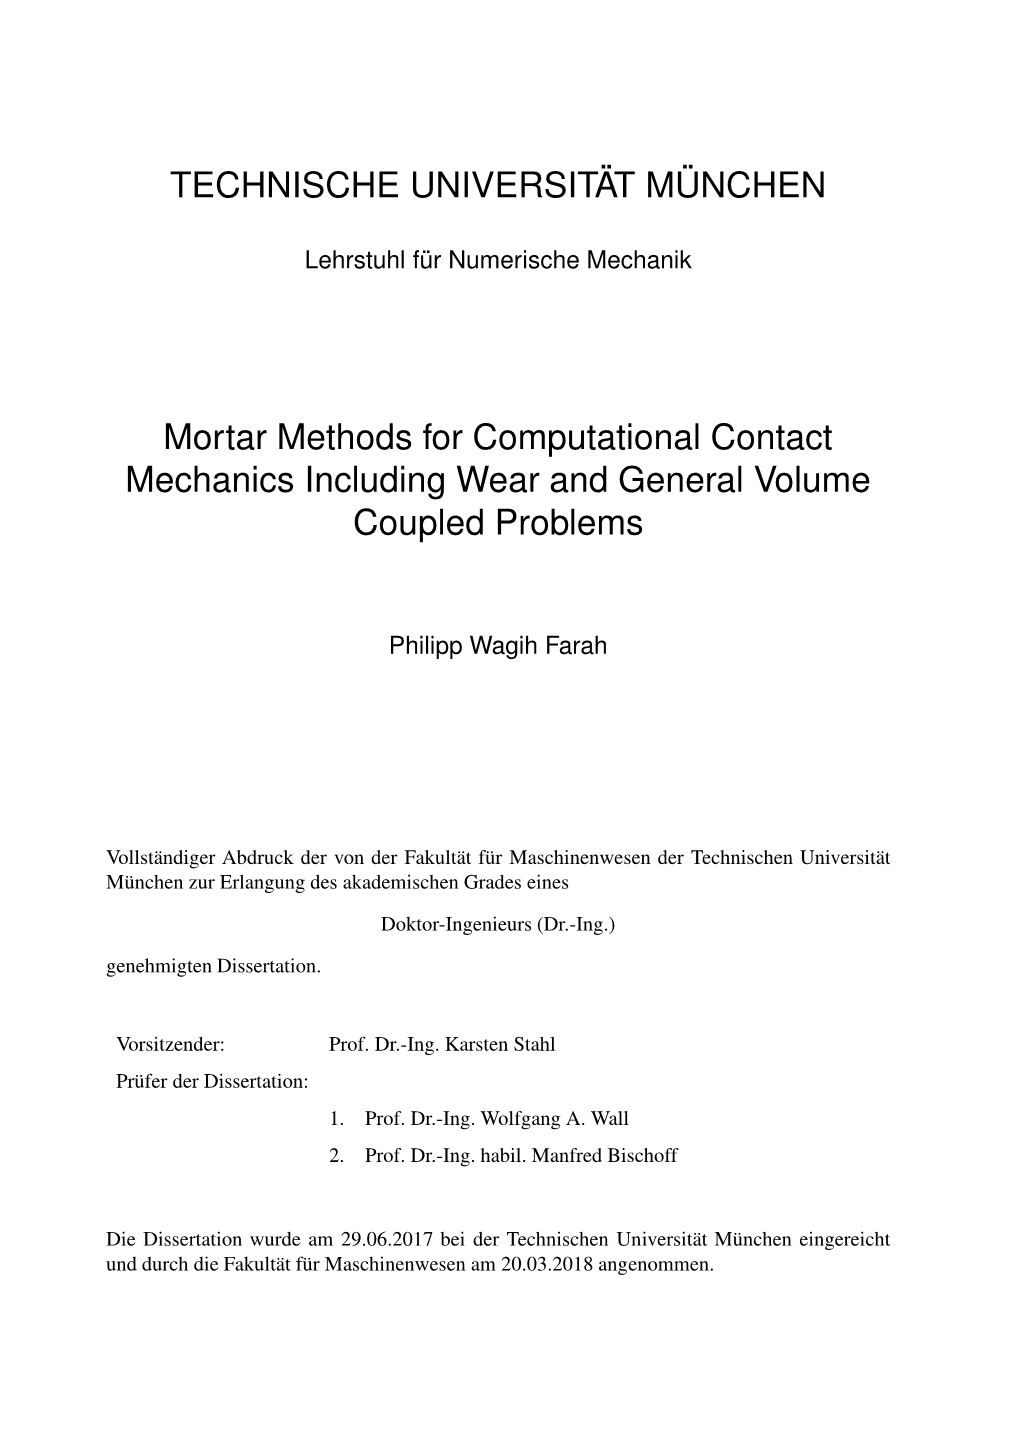 Mortar Methods for Computational Contact Mechanics Including Wear and General Volume Coupled Problems